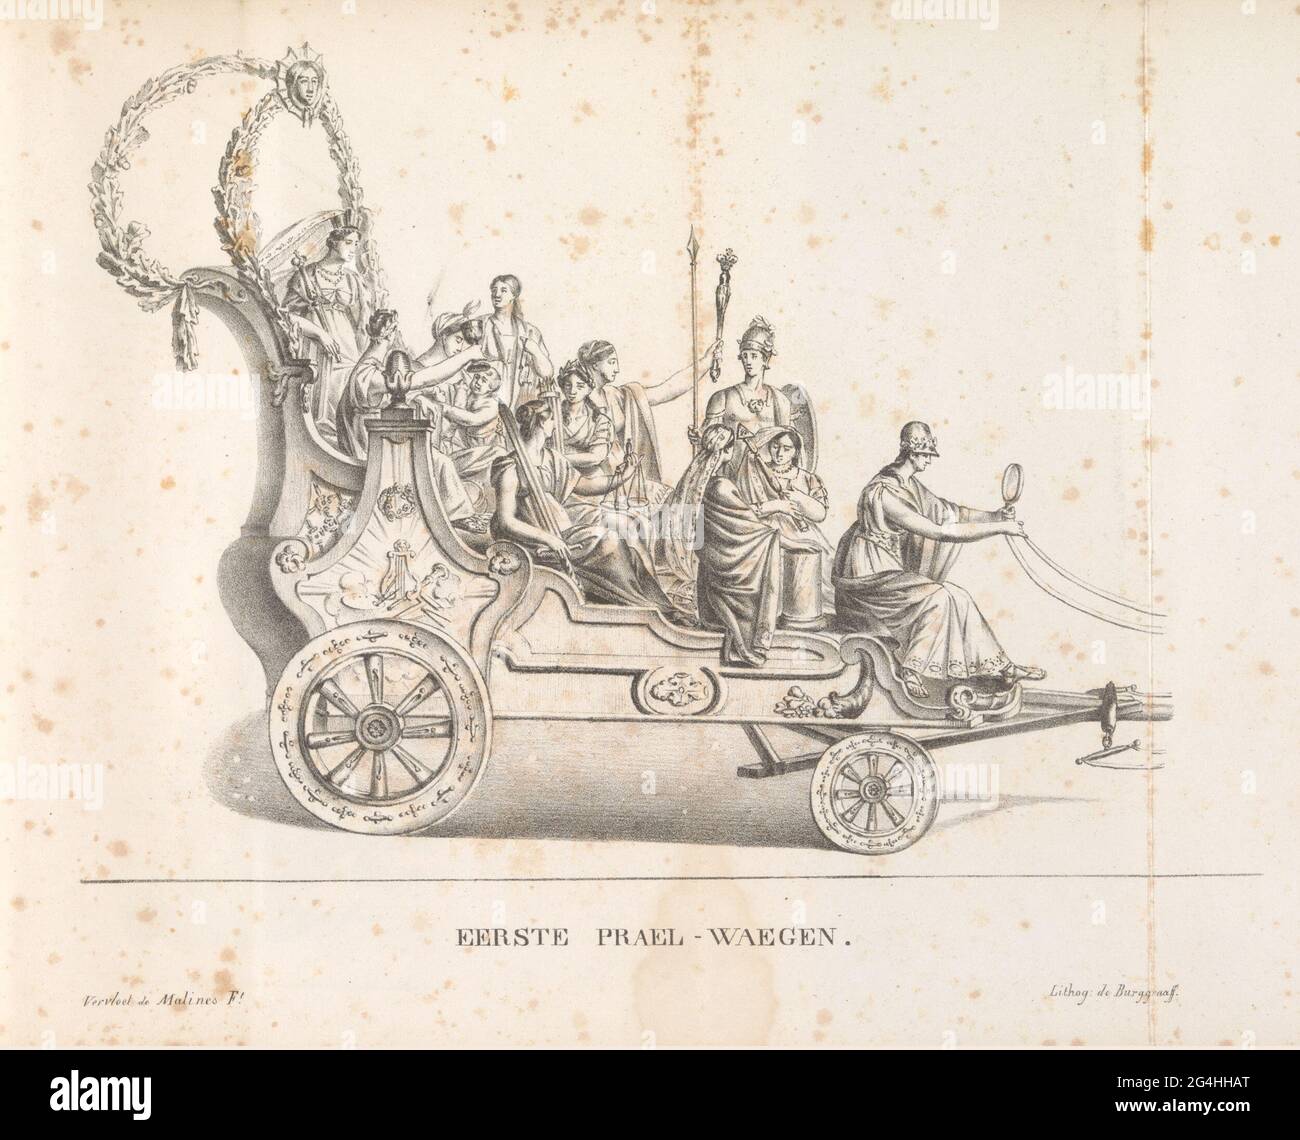 First float in the procession for the Holy Rombout, 1825; First Prael-Waegen. The first float in the conversation for the Holy Rombout. The city mawn from Mechelen accompanied by virtues on the car. The procession was held on June 28, 5 and 12, 1825. Illustration in a publication on the occasion of the 50-year celebration in 1825 of the Jubilee of the Saint Rumold or Rombout, patron saint of the city of Mechelen. Stock Photo